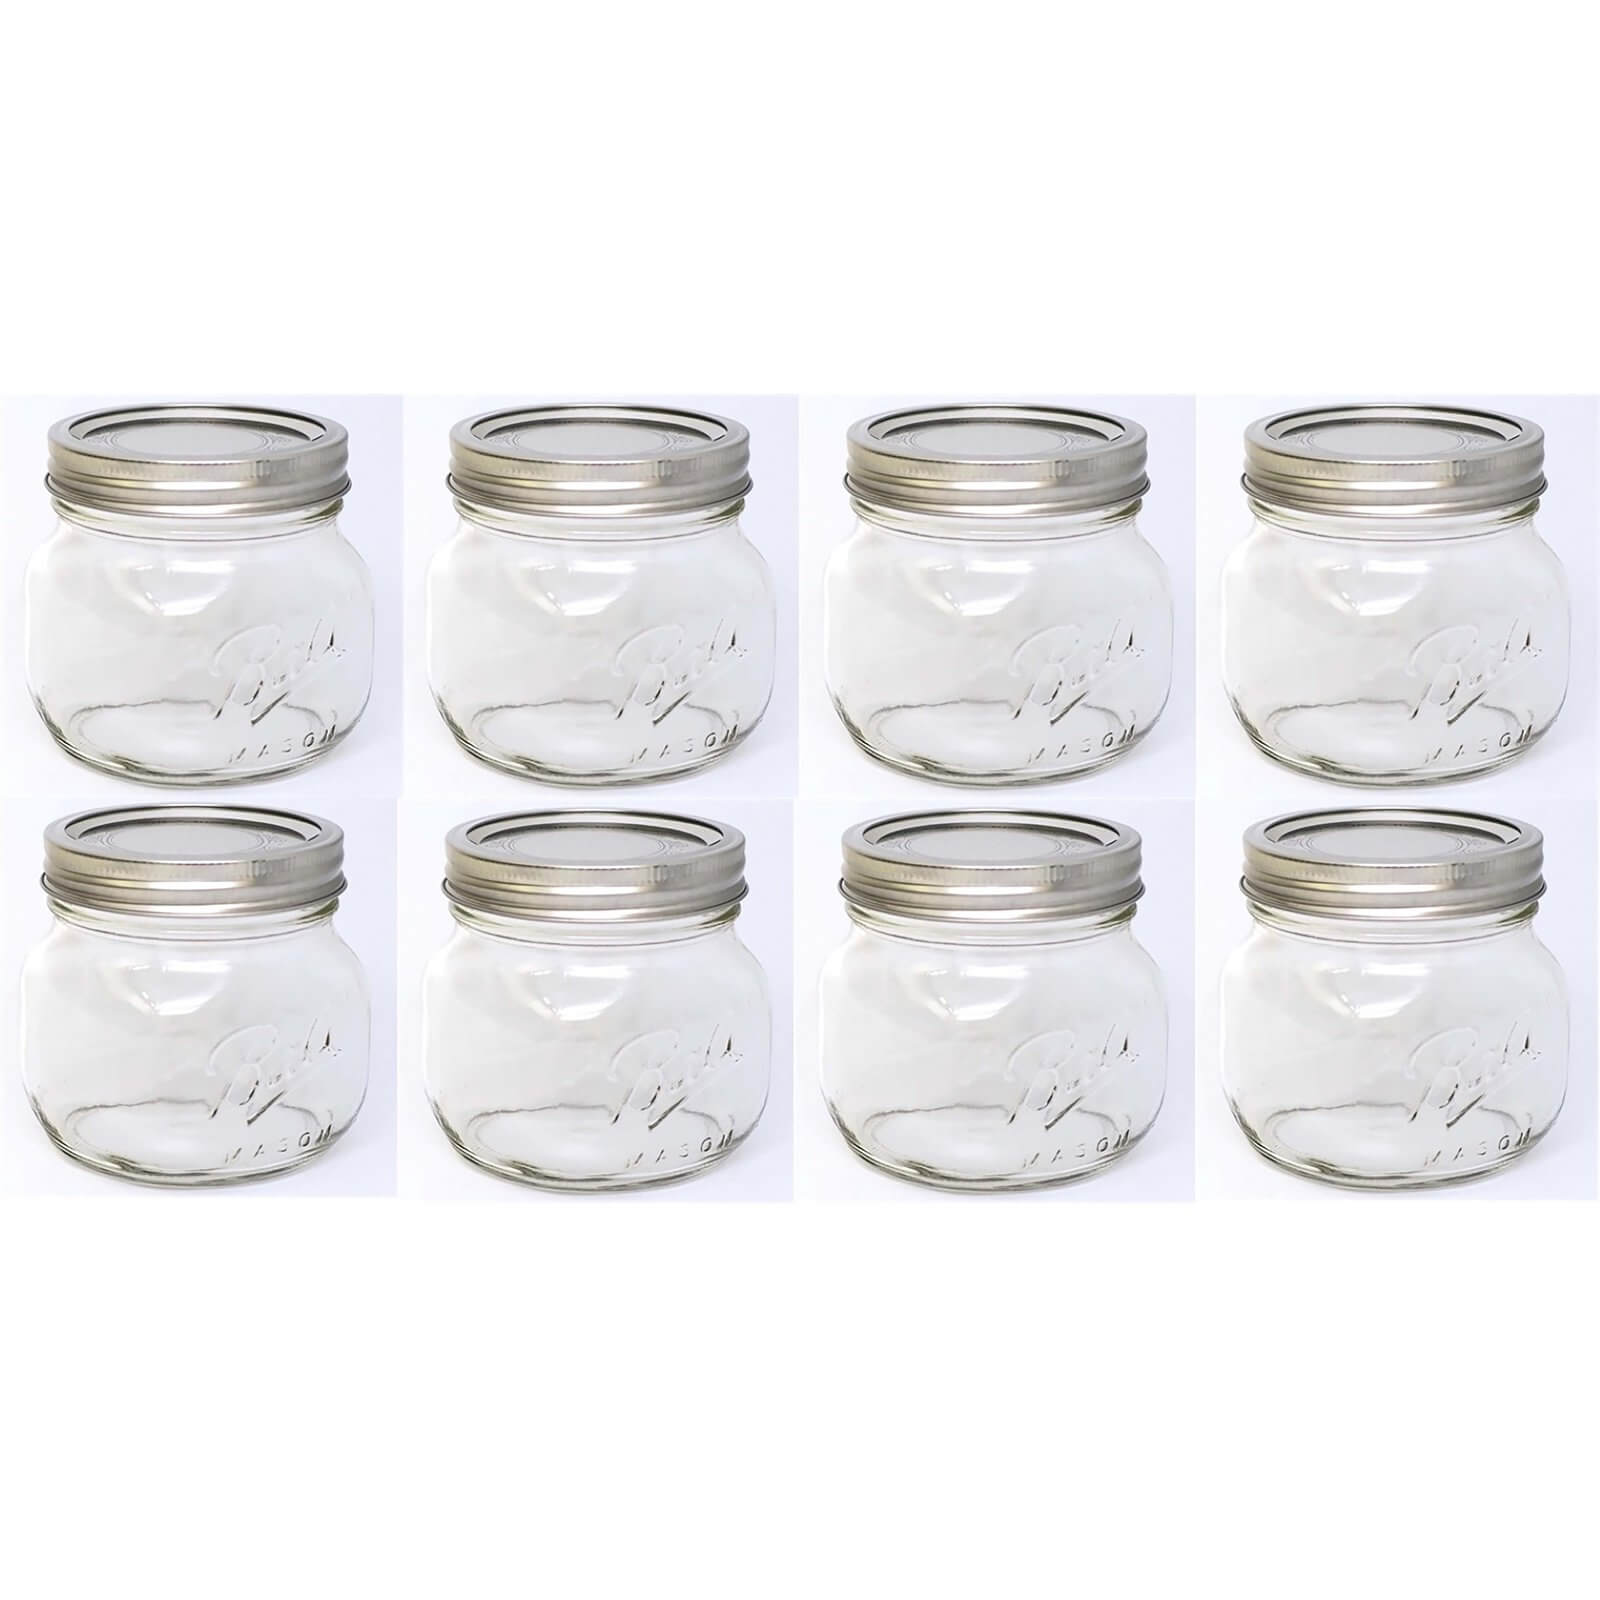 Ball Mason Jars - Pack of 8 - 490ml - Wide Mouth